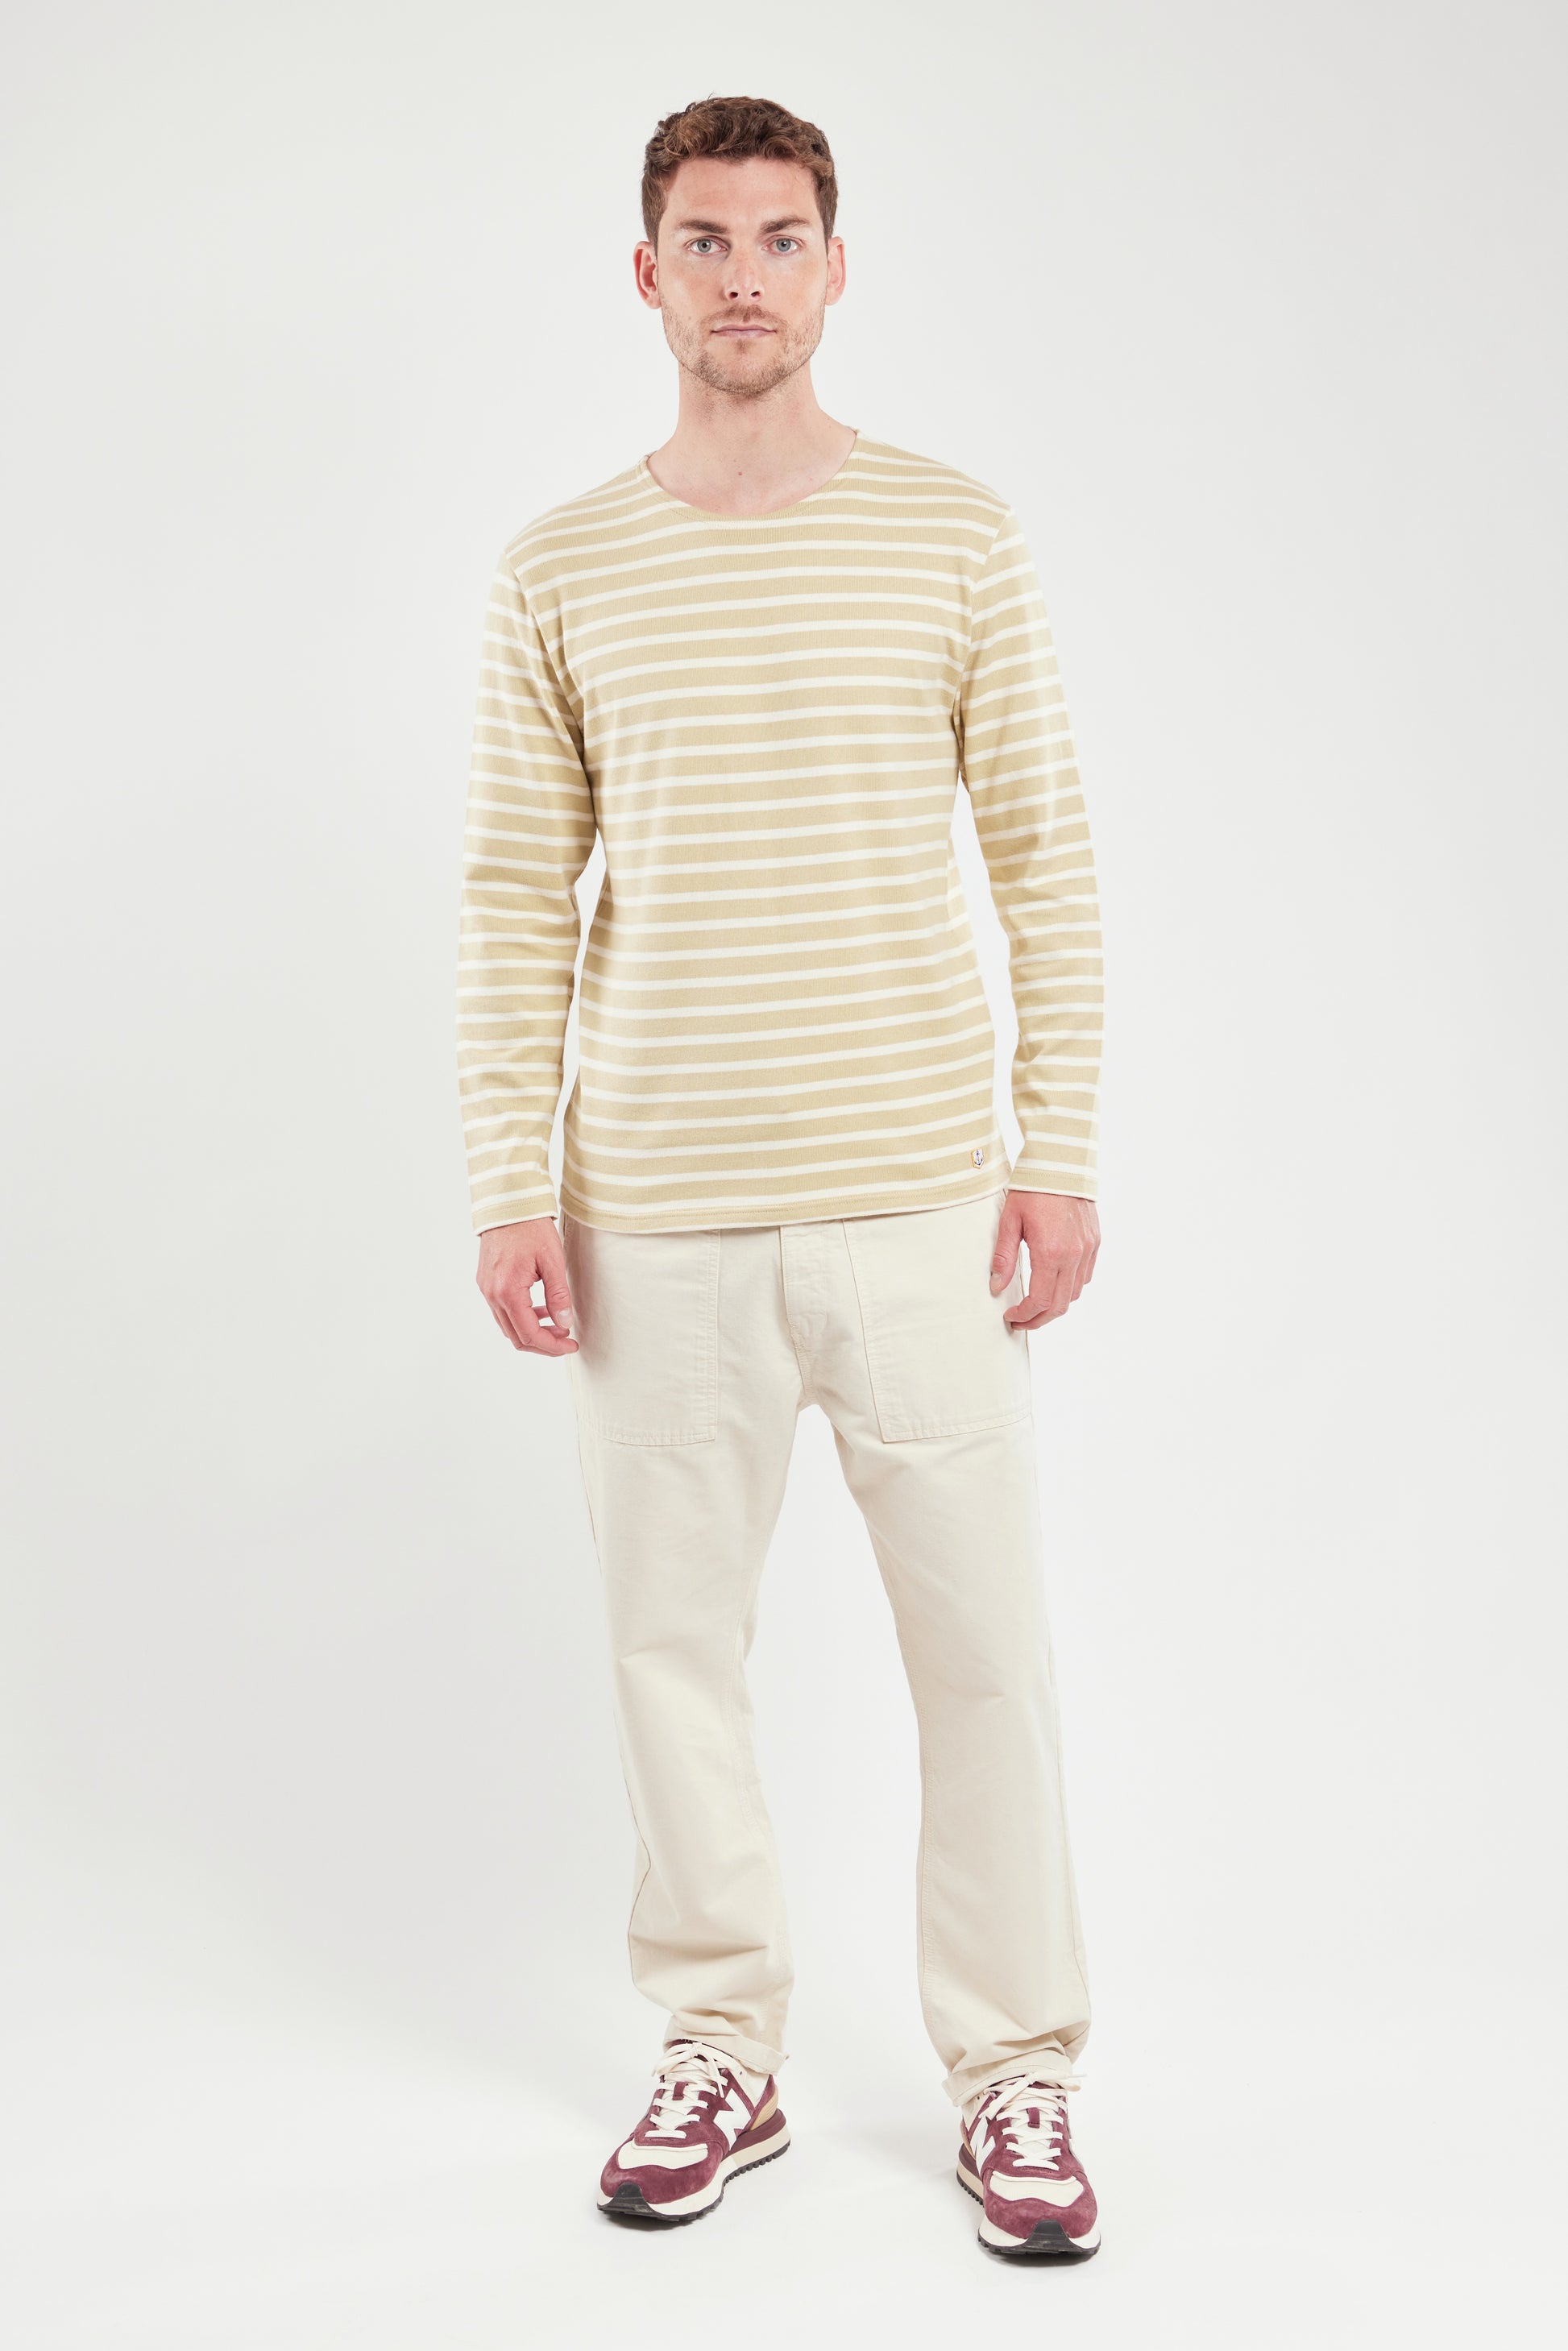 Armor Lux Breton Long Sleeve T-Shirt in pale olive and nature cream